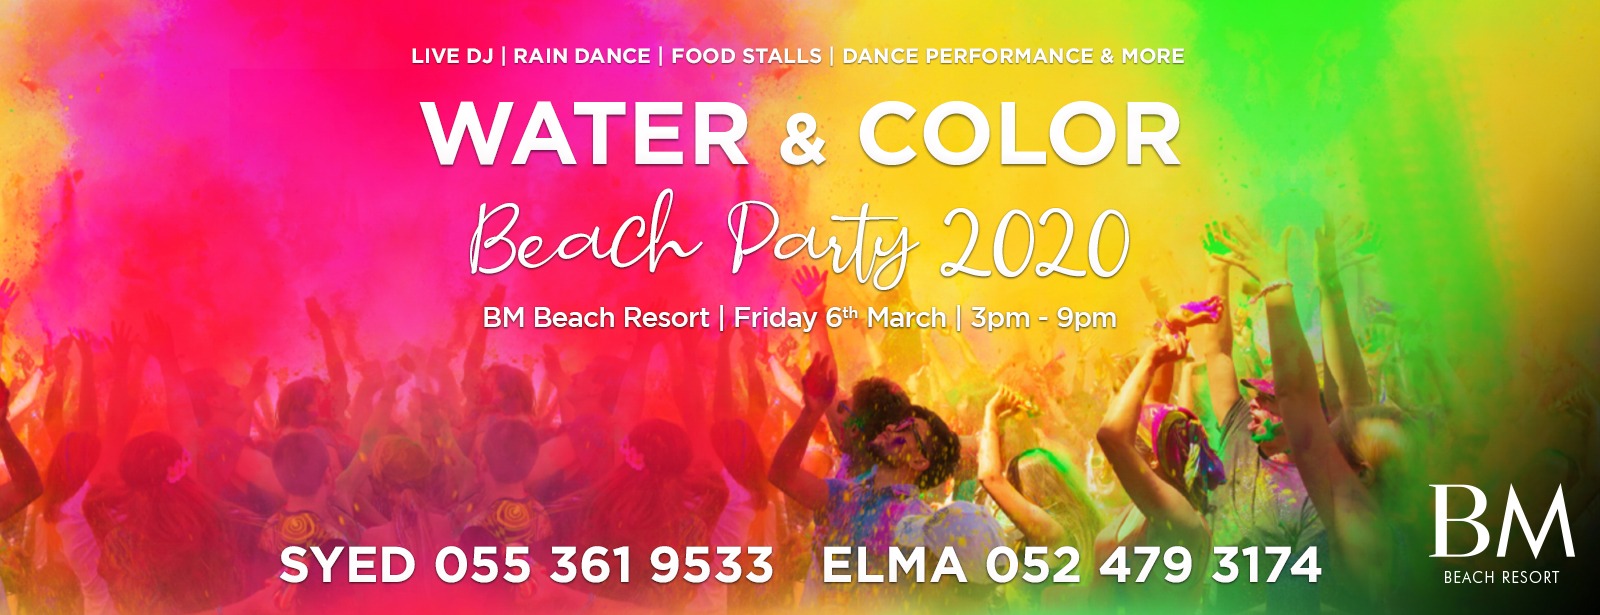 Water & Colour Beach Party at BM Beach Resort - Coming Soon in UAE